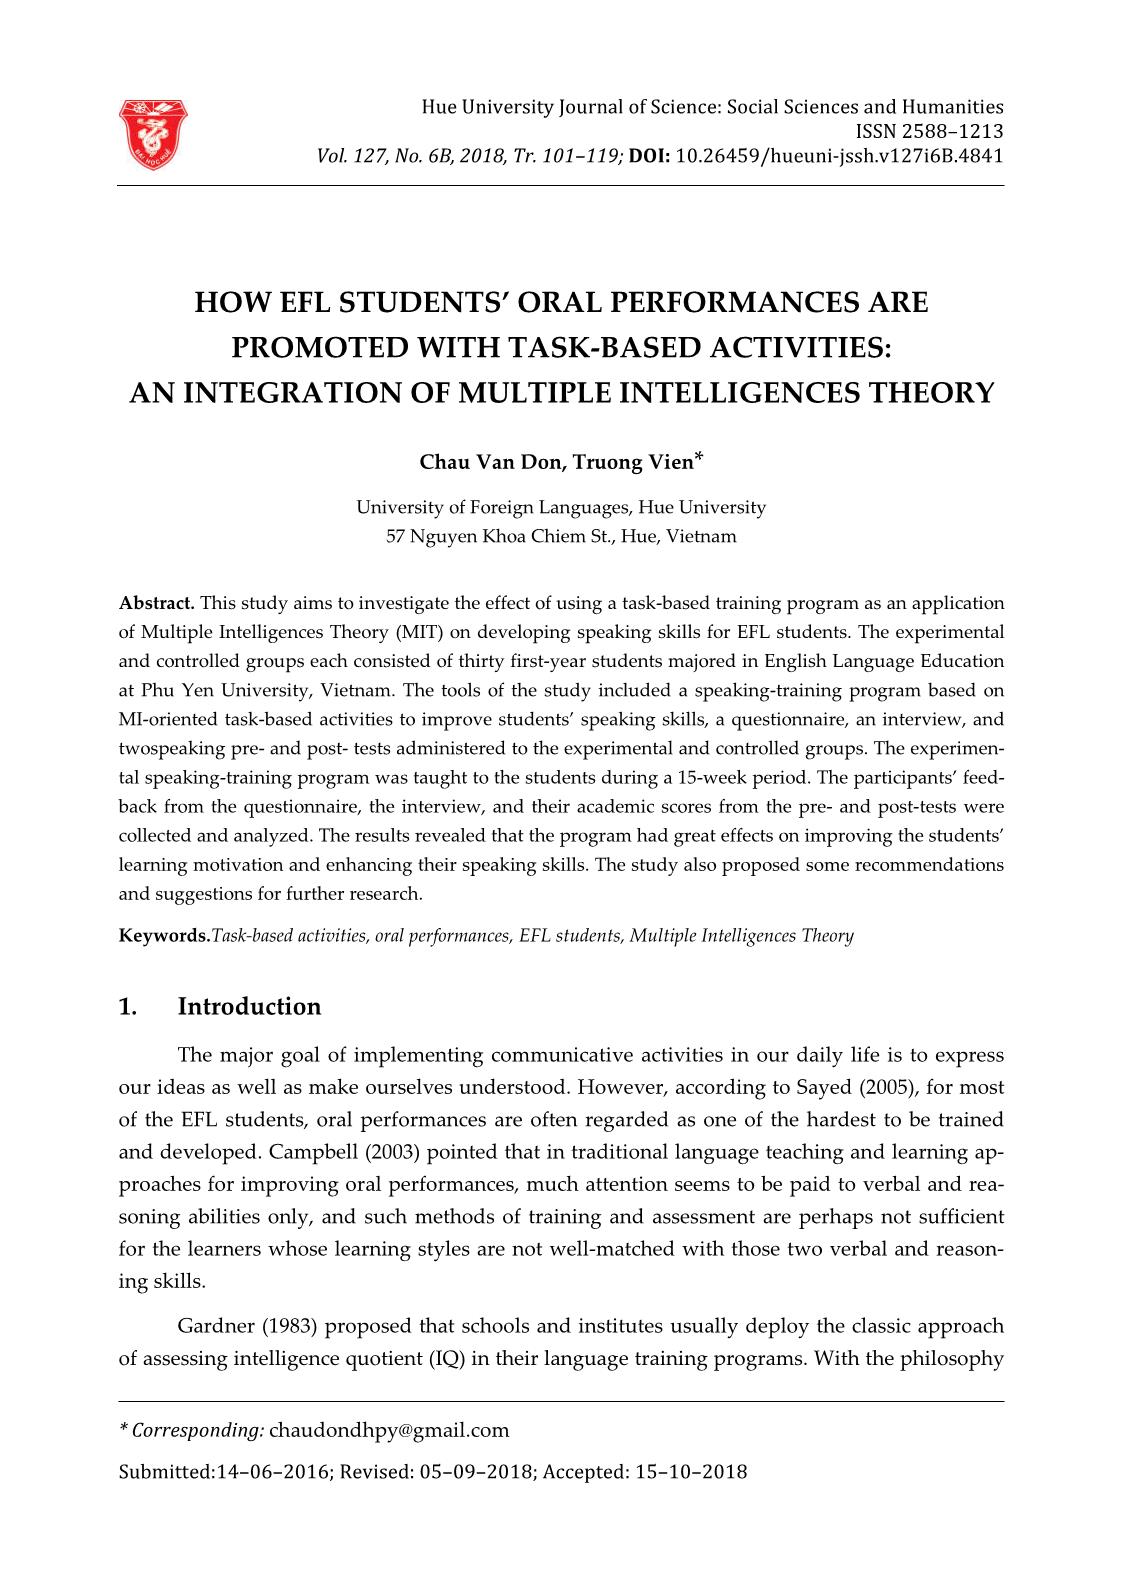 How EFL students’ oral performances are promoted with task-based activities: An integration of multiple intelligences theory trang 1